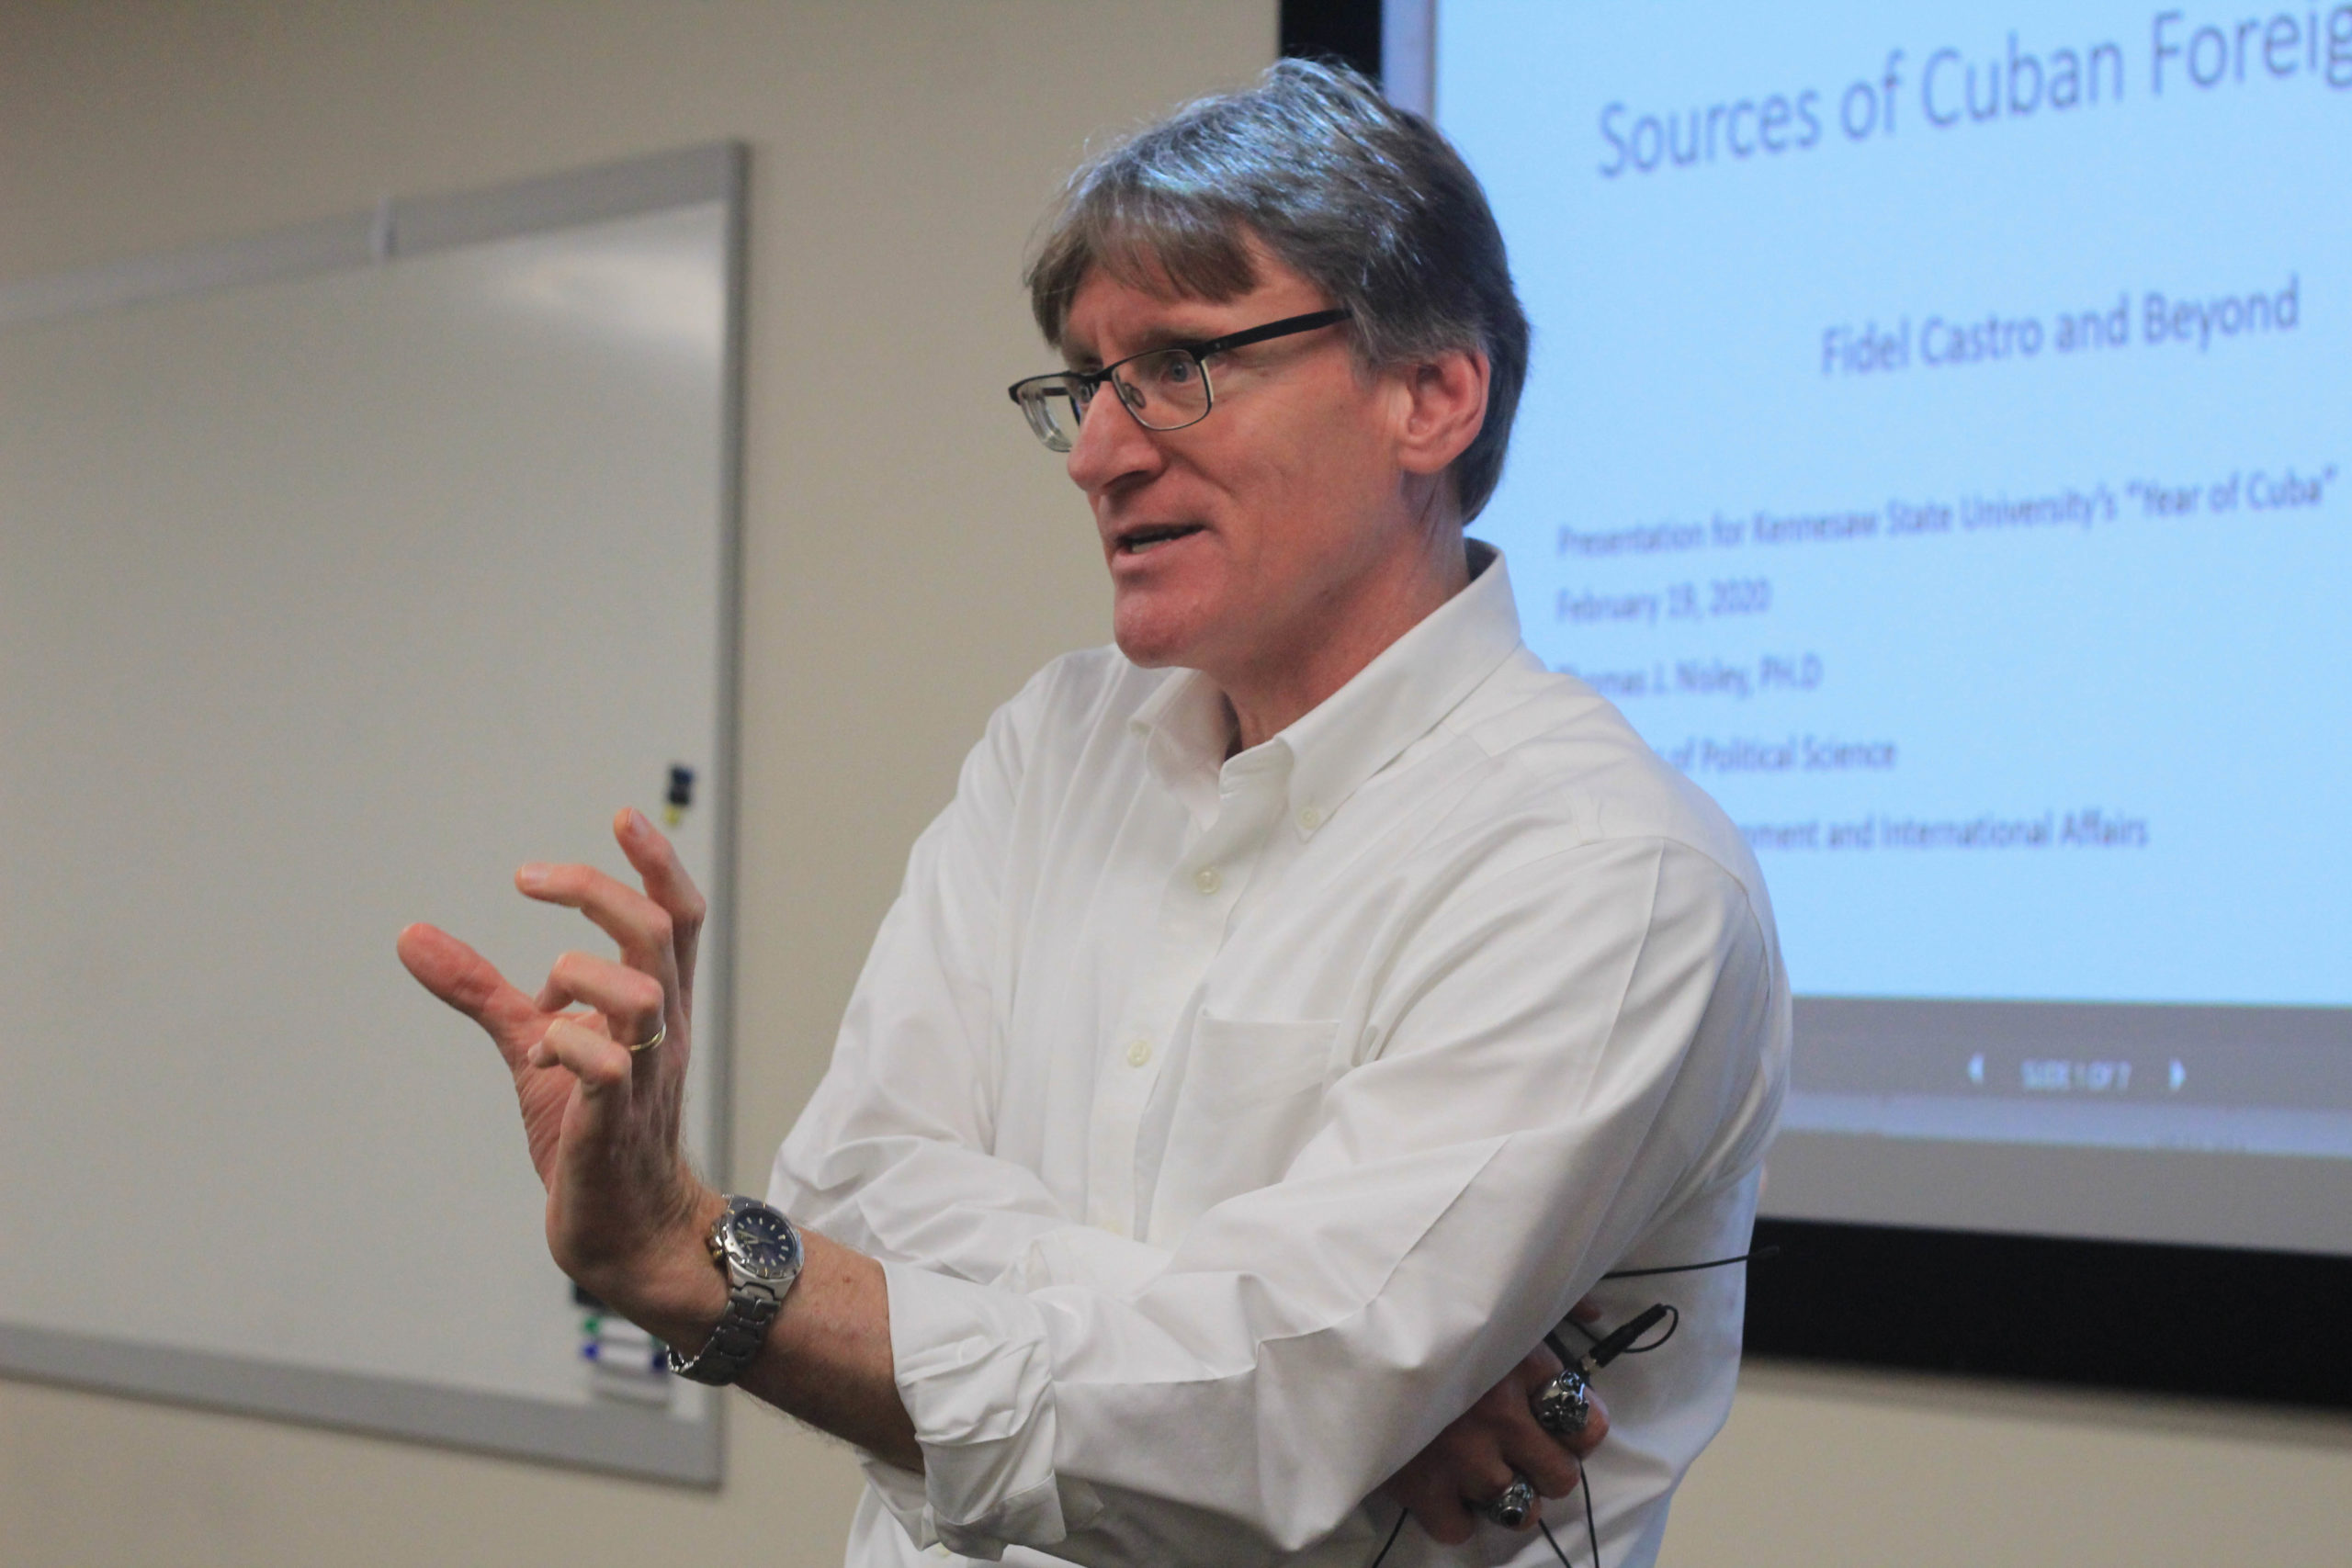 Lecture reveals Cuba’s misunderstood policy background